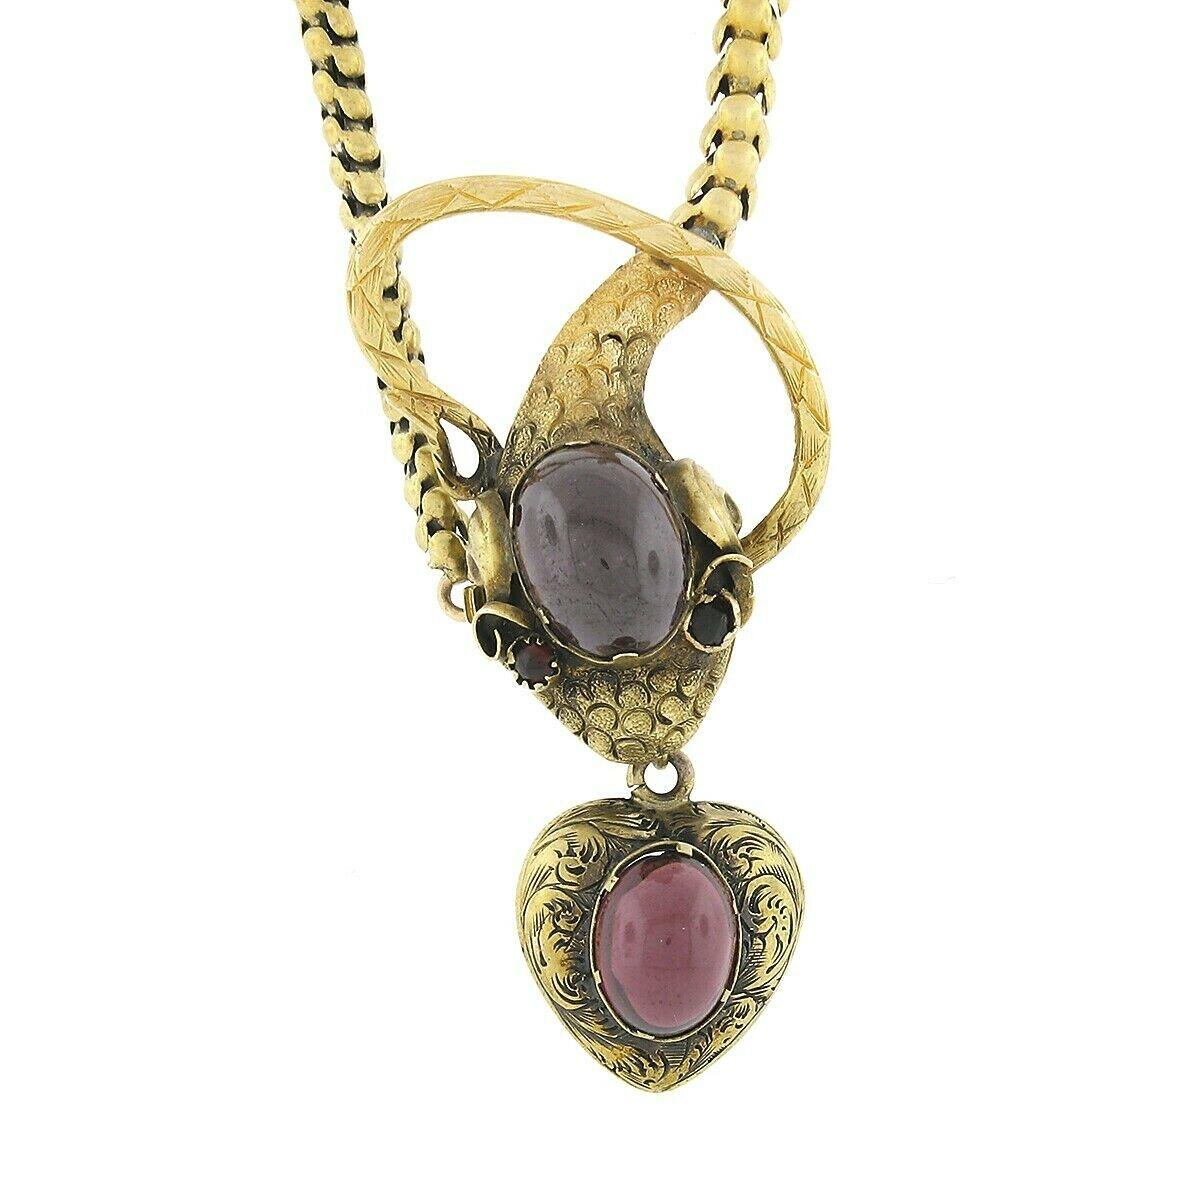 Here we have an incredible antique necklace crafted in solid 18k yellow gold and features a magnificent snake necklace adorned with fine garnet stones. The snakes head is set at the center of the necklace with a puffed heart gently dangling from its